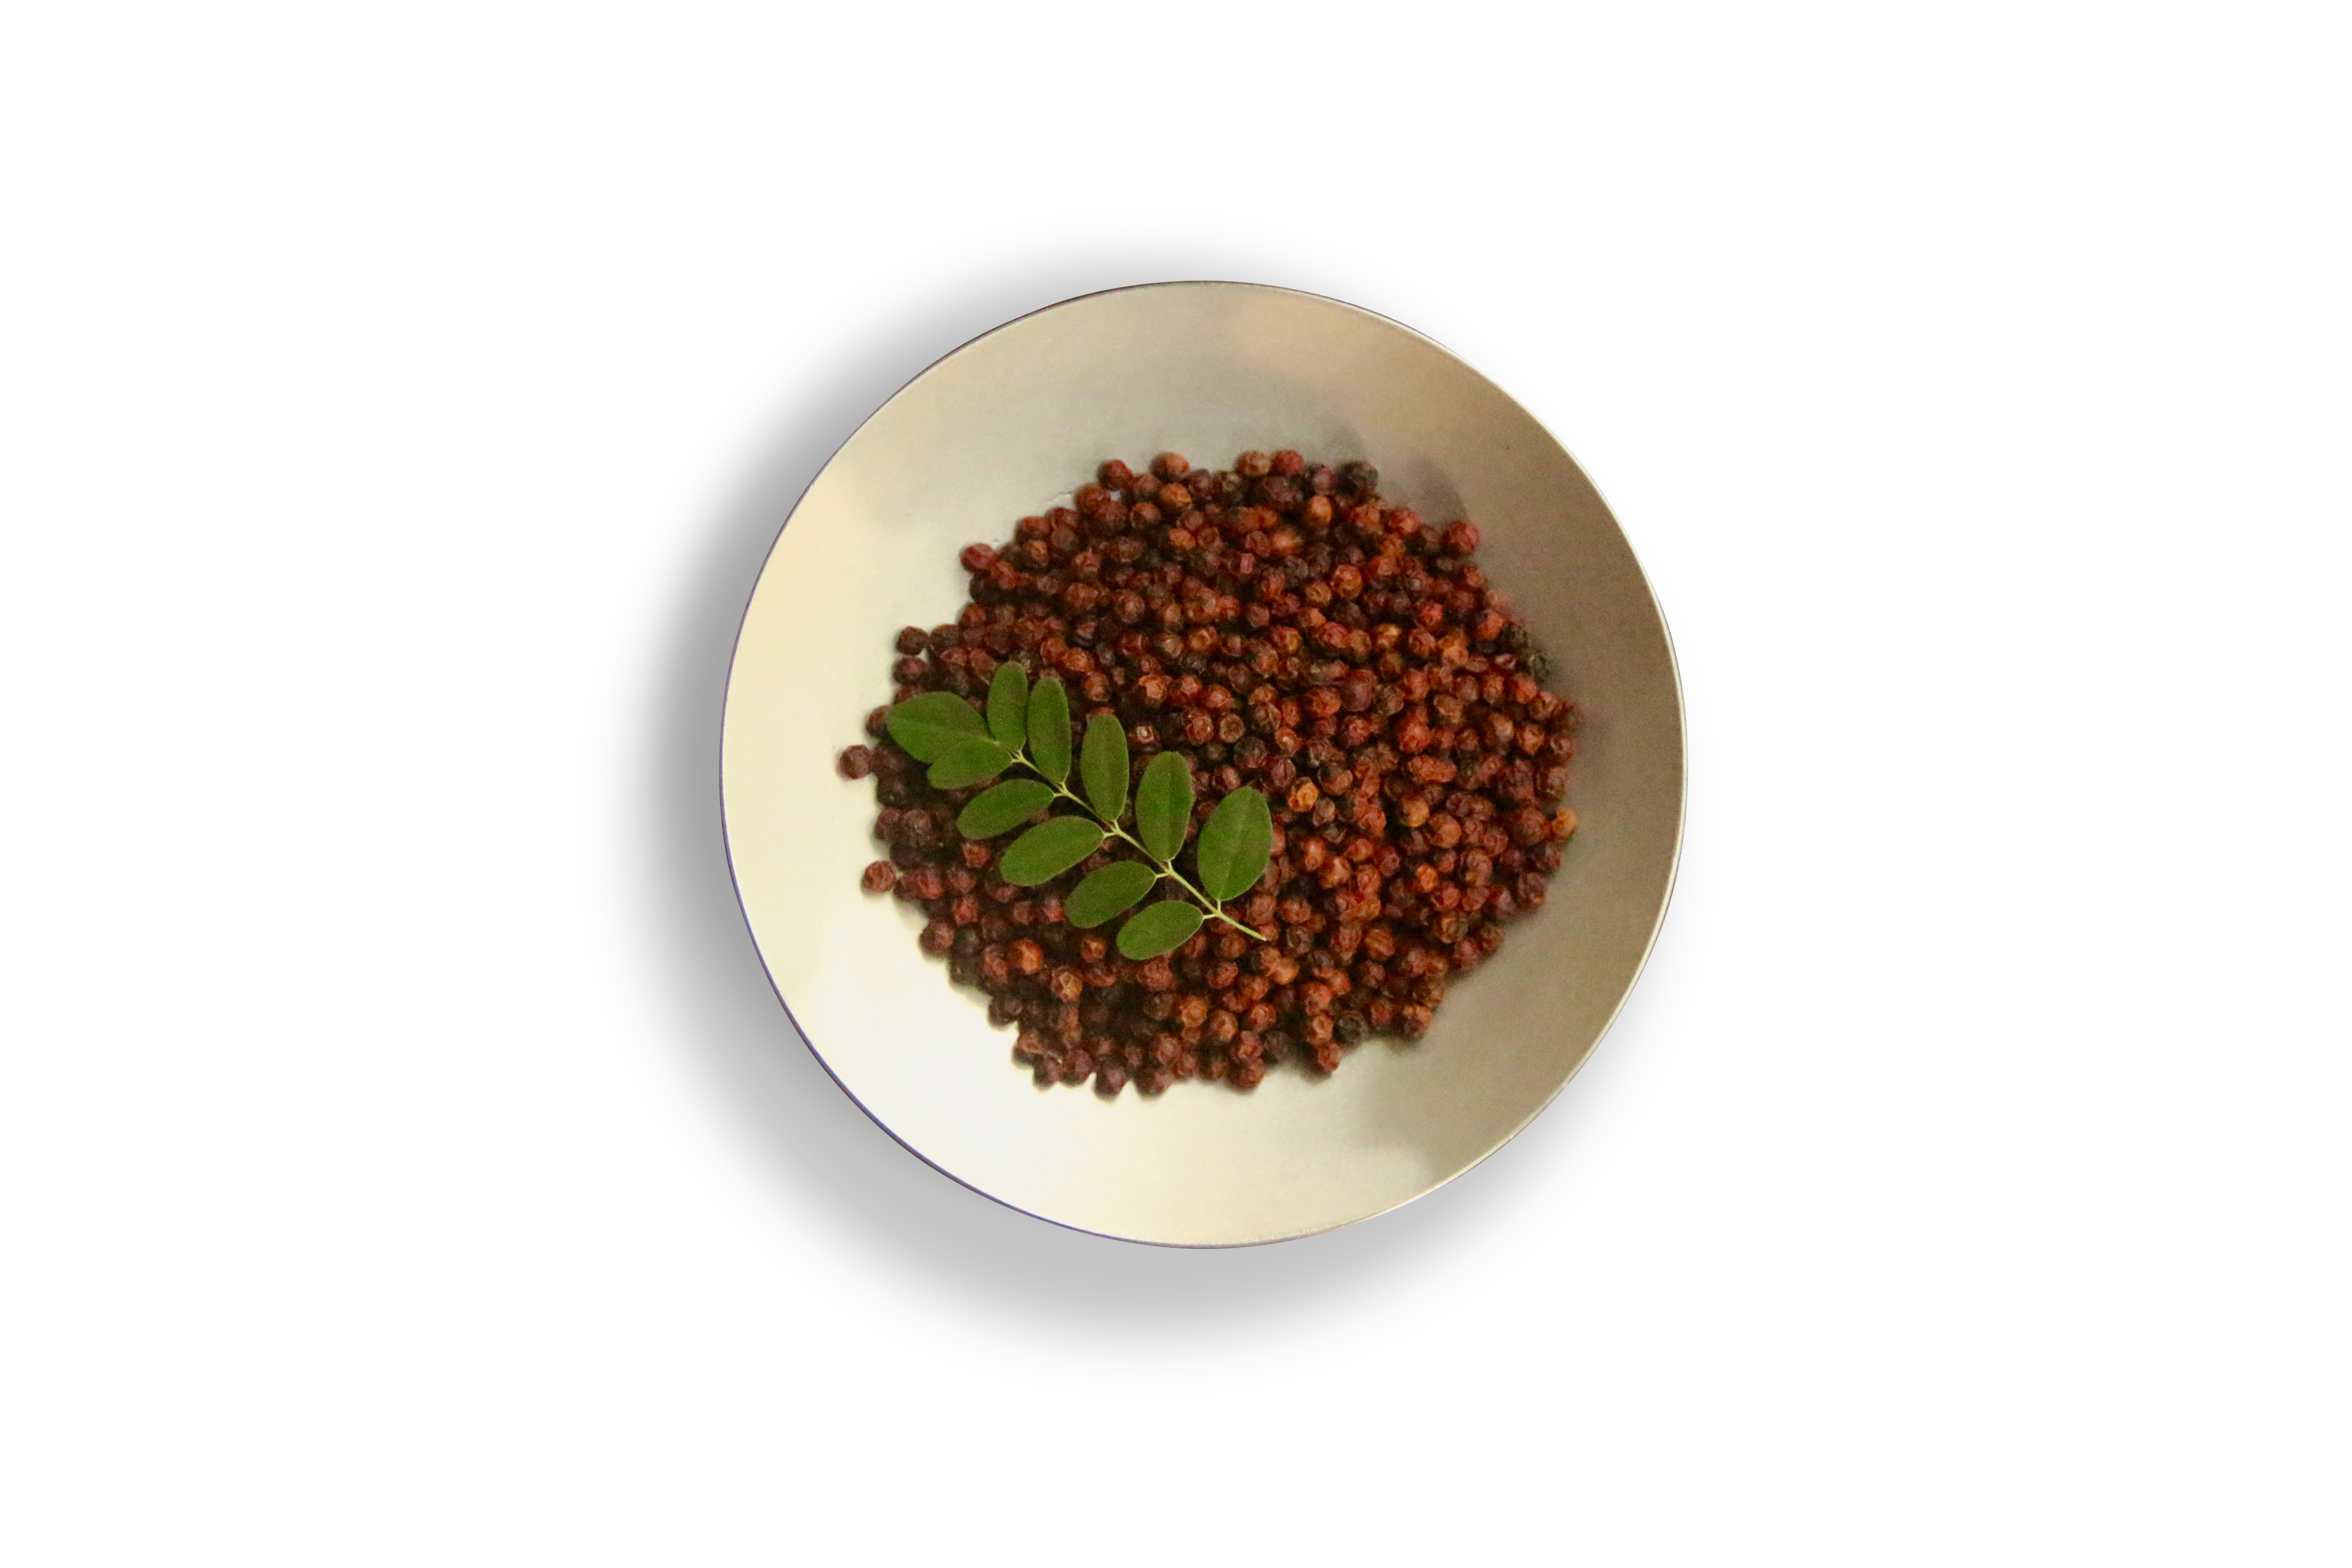 Bowl of red pepper with a moringa leaf on top